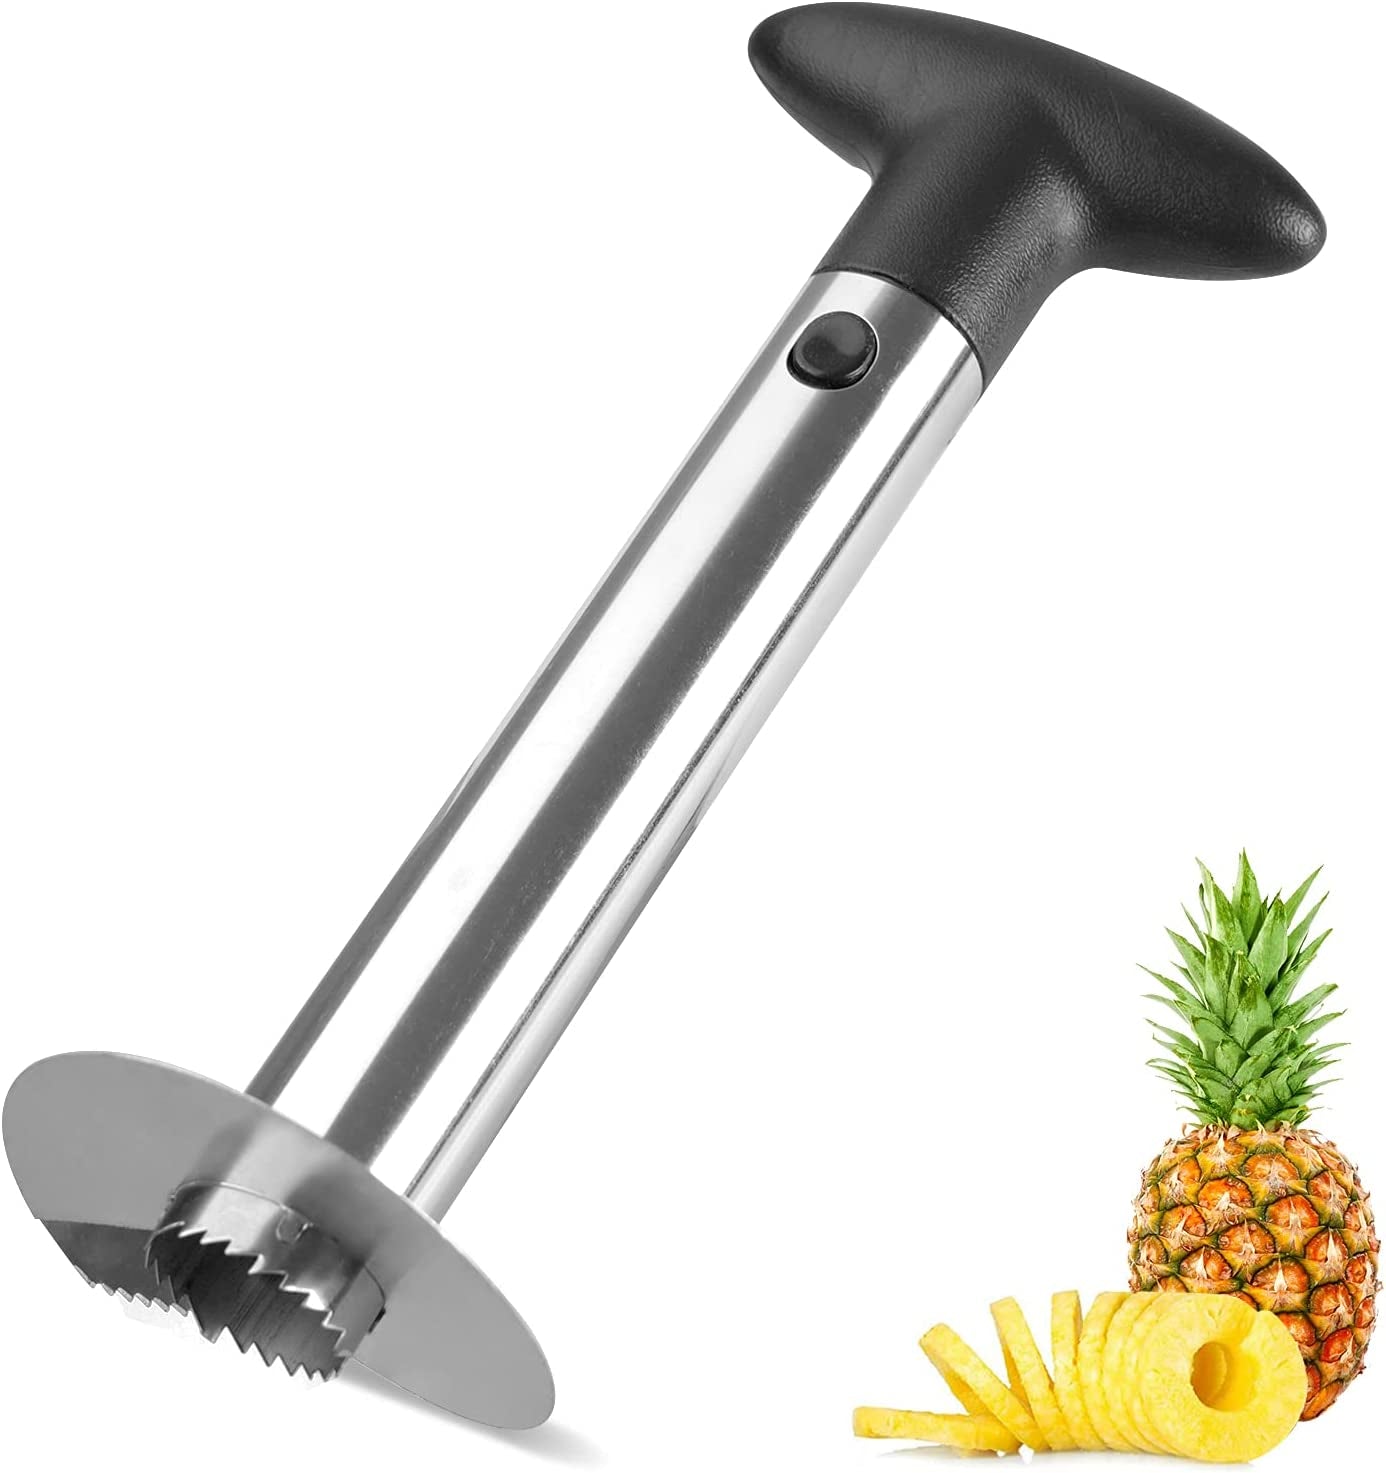 Pineapple Corer and Slicer Tool, Premium Stainless Steel Pineapple Core Remover Tool with Detachable Handle, Super Fast and Easy Pineapple Cutter for Home & Kitchen